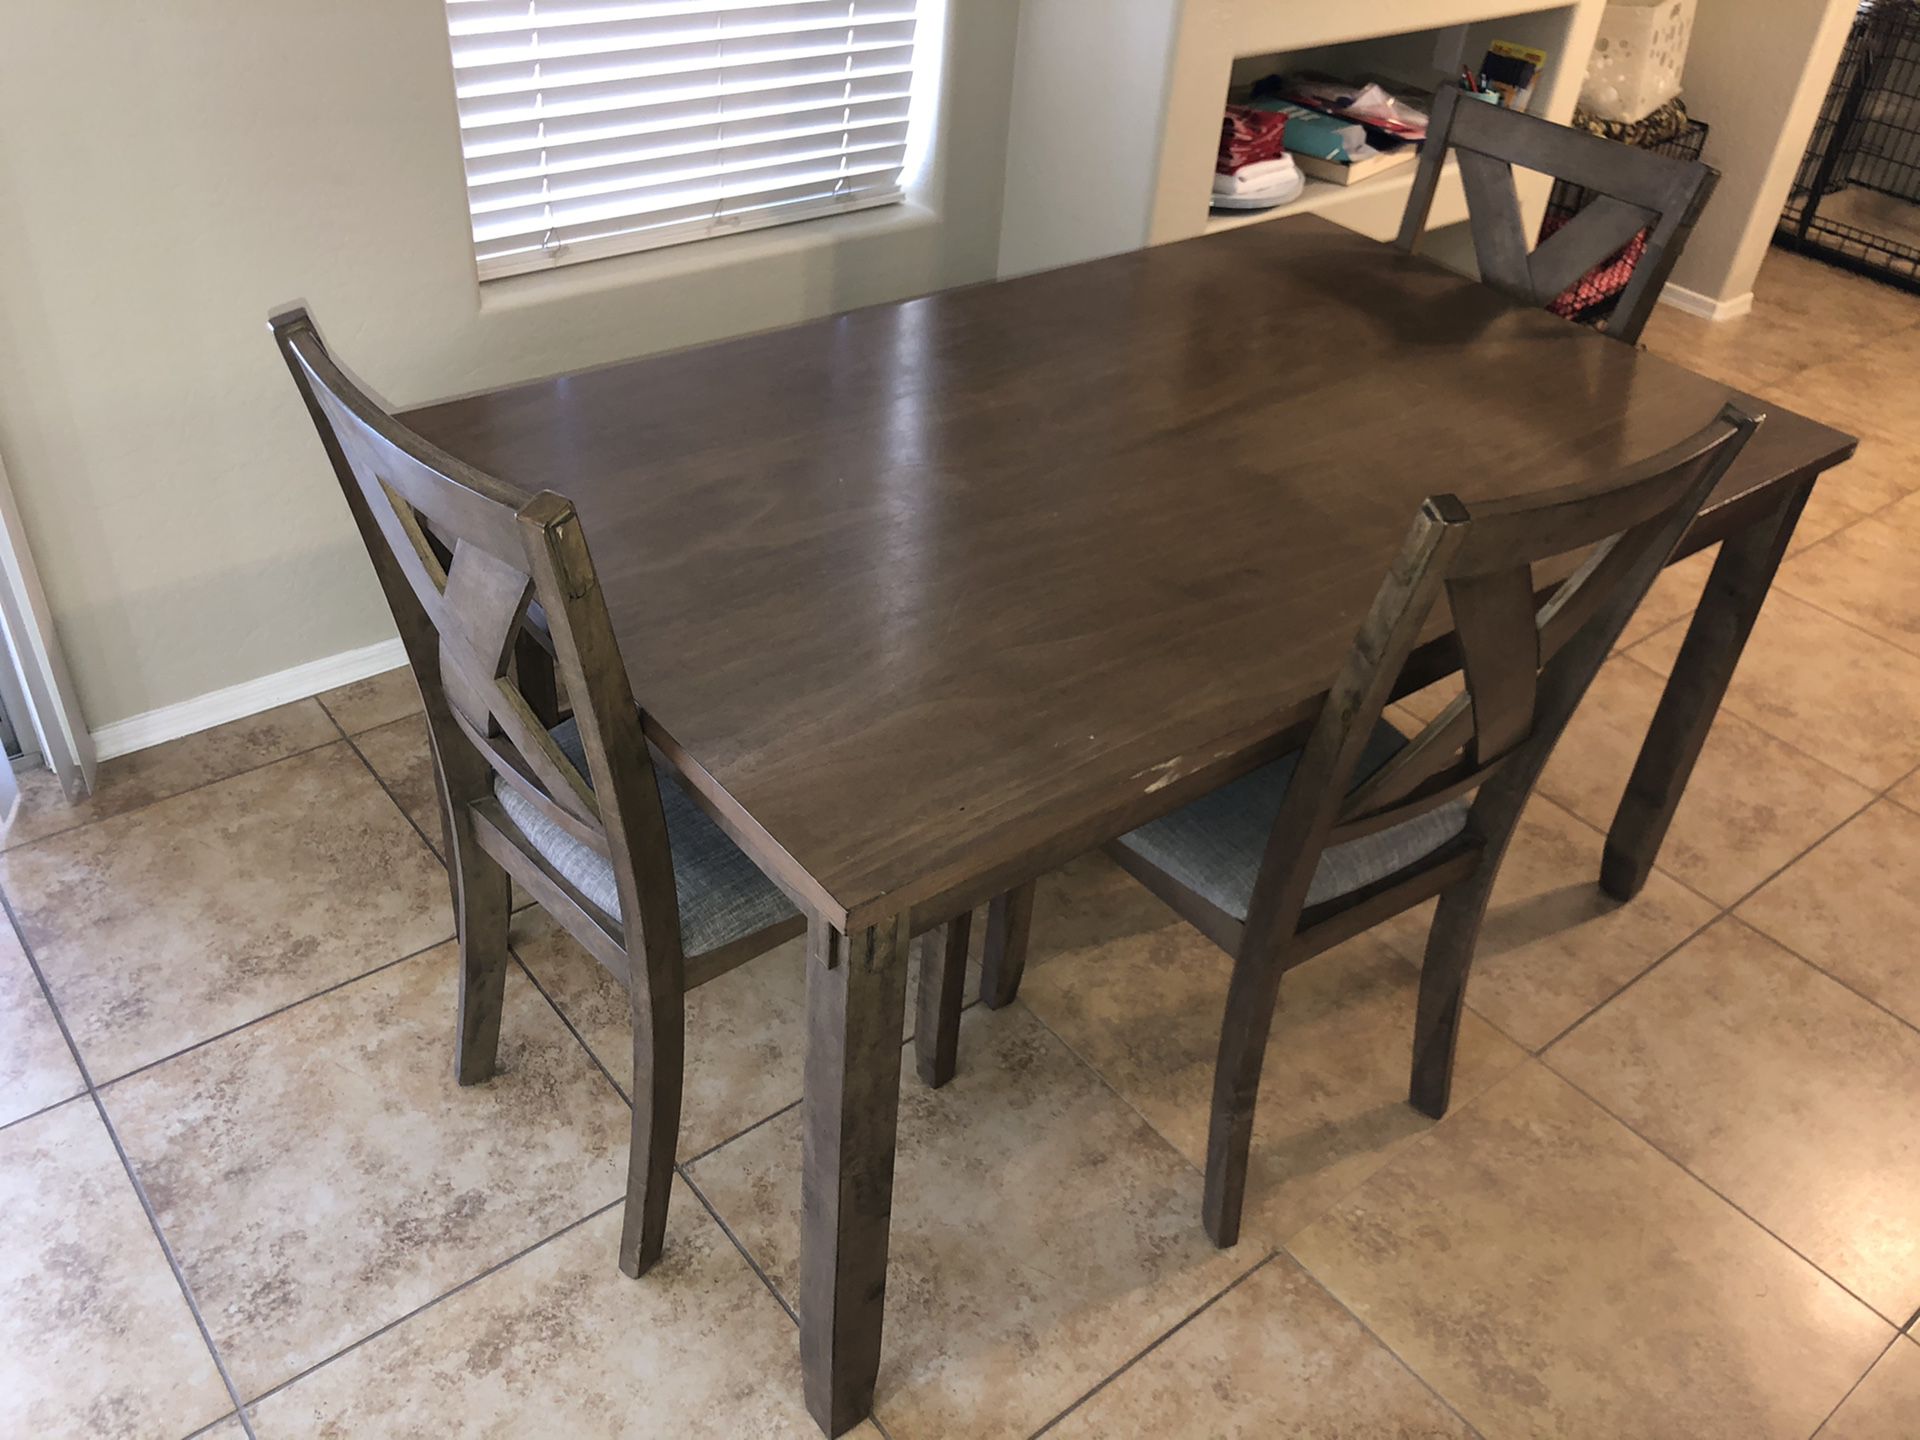 Kitchen table w/ chairs and bench